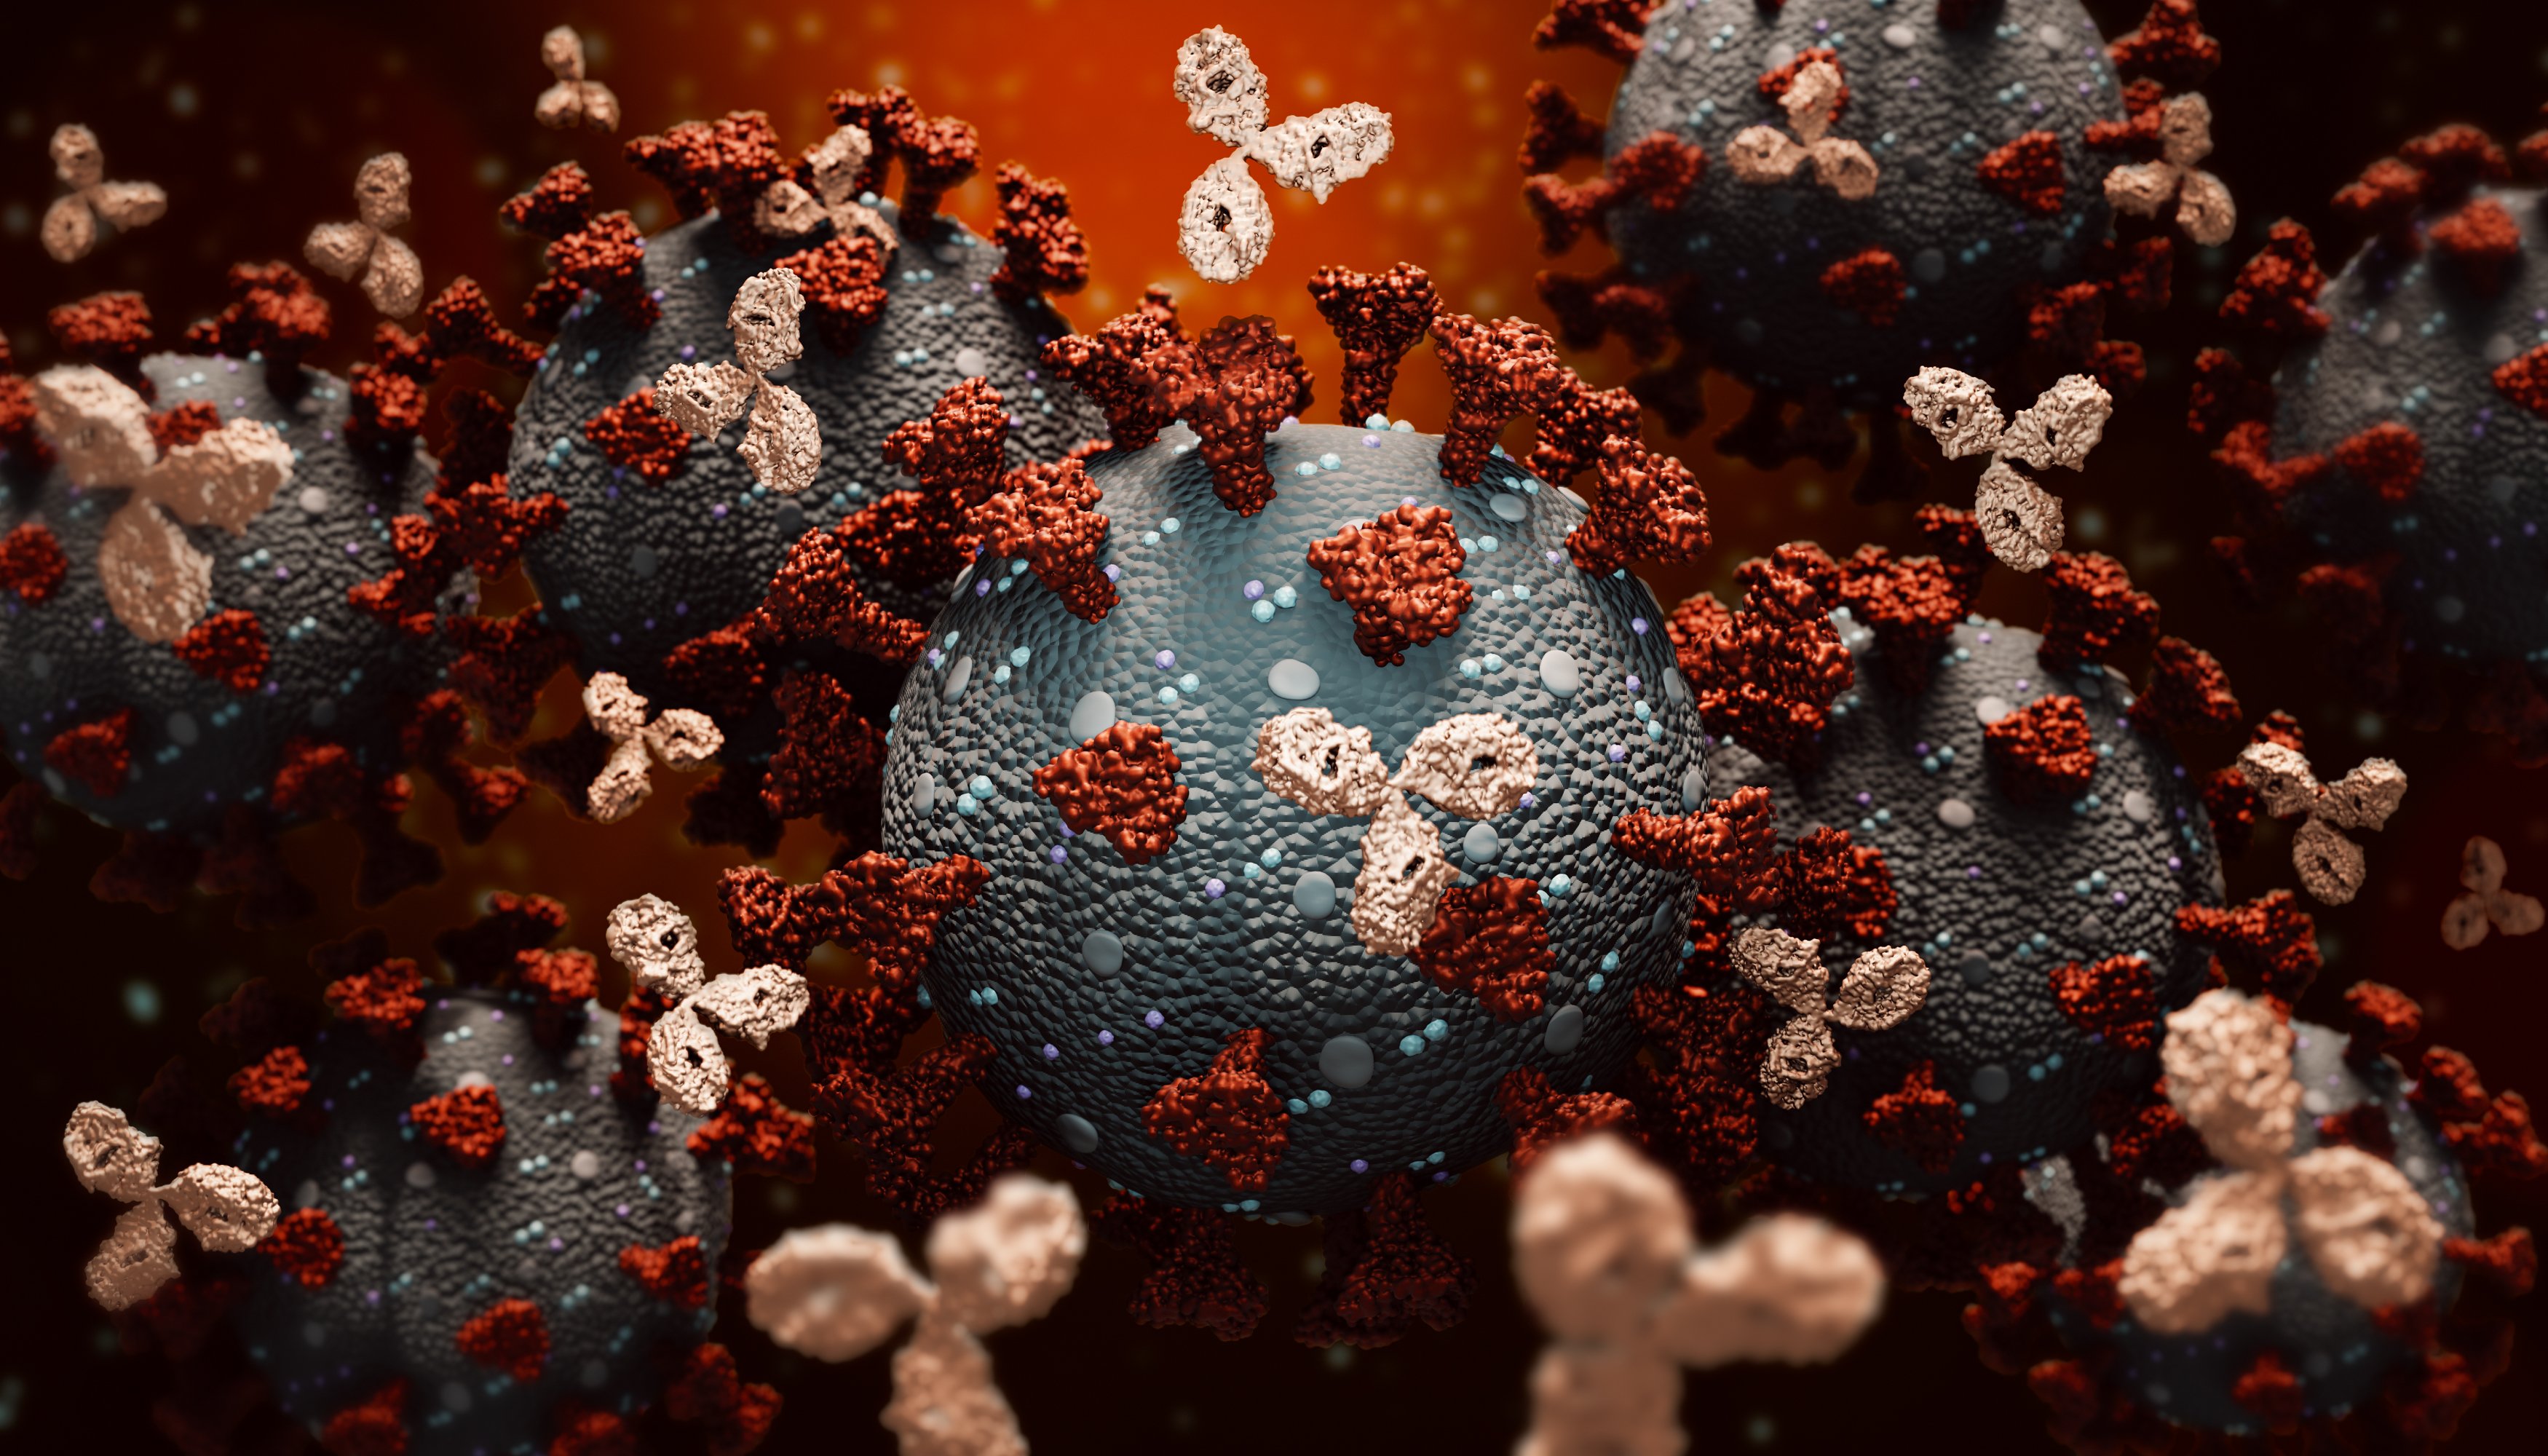 Monoclonal Antibody GettyImages